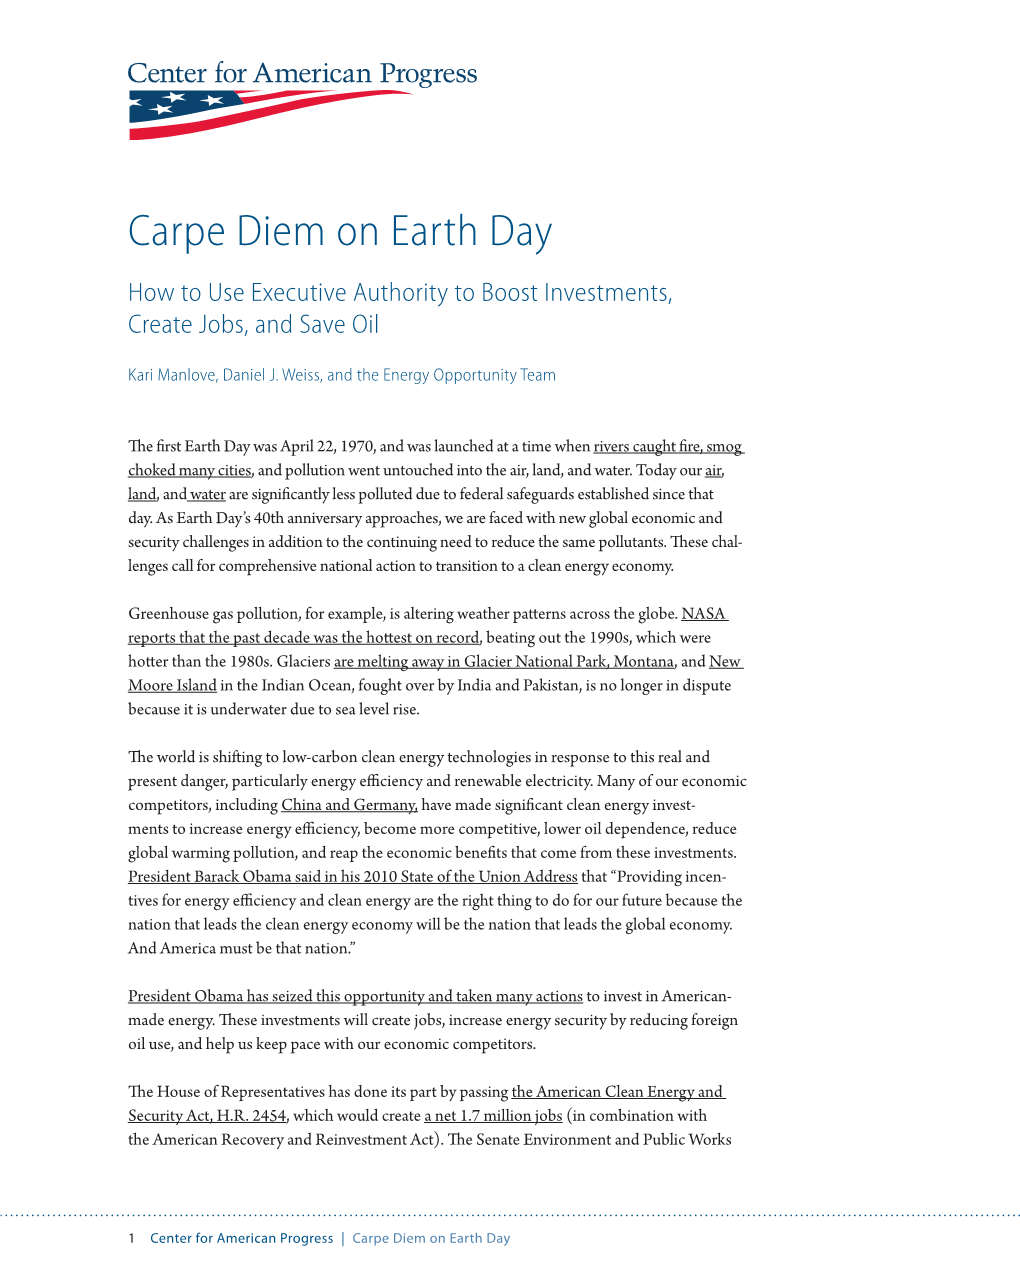 Carpe Diem on Earth Day How to Use Executive Authority to Boost Investments, Create Jobs, and Save Oil